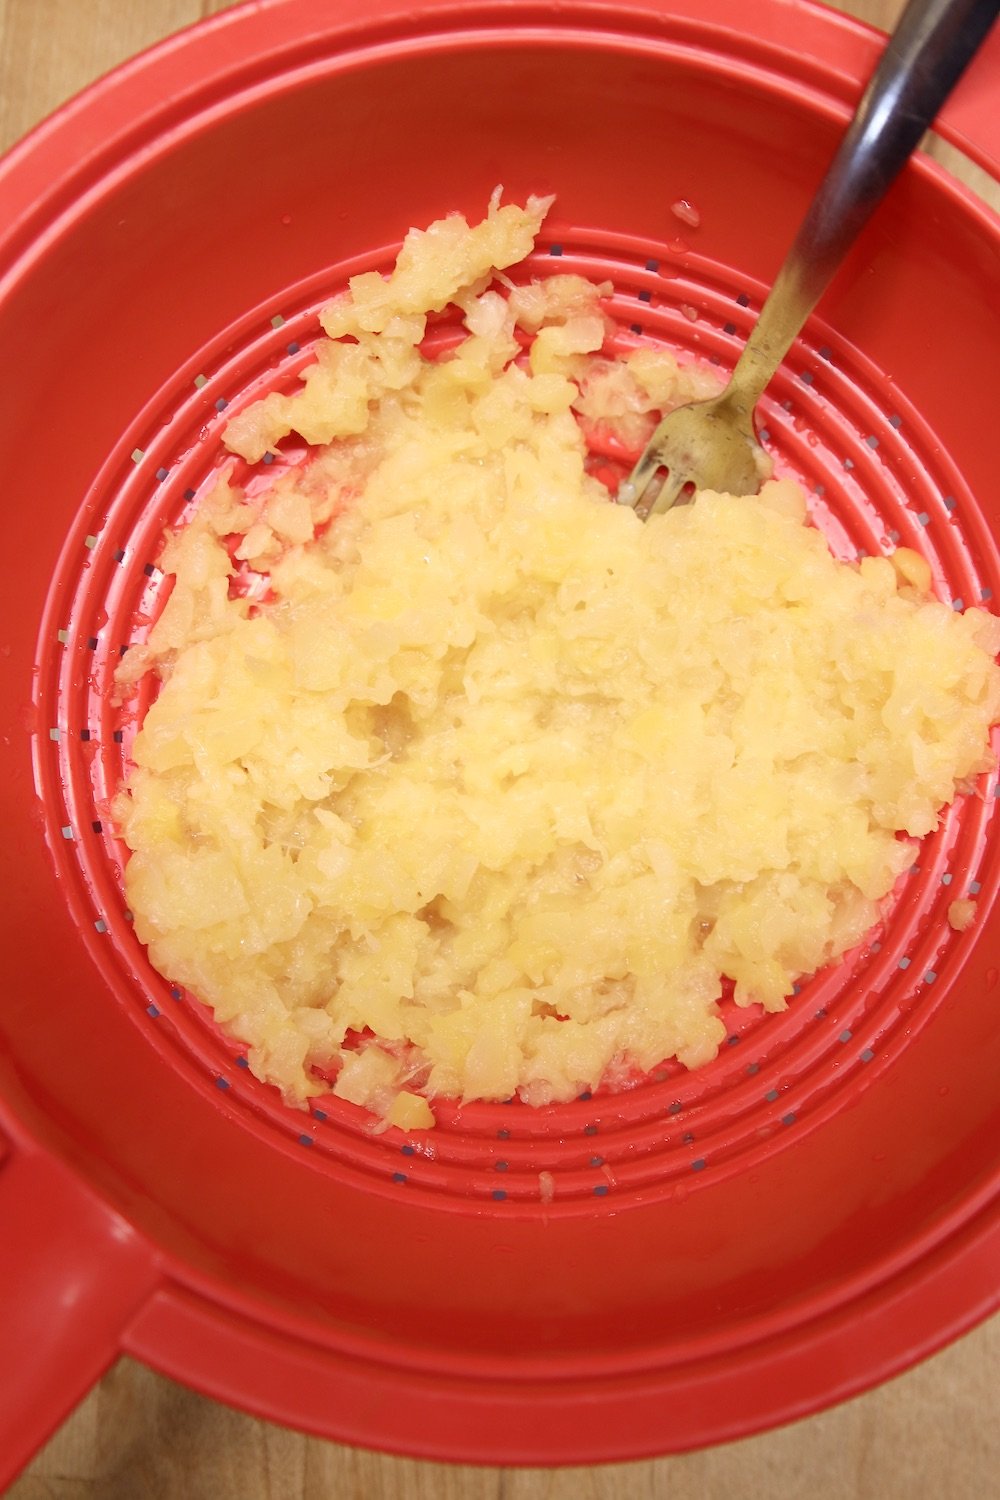 crushed pineapple drained in a red colander